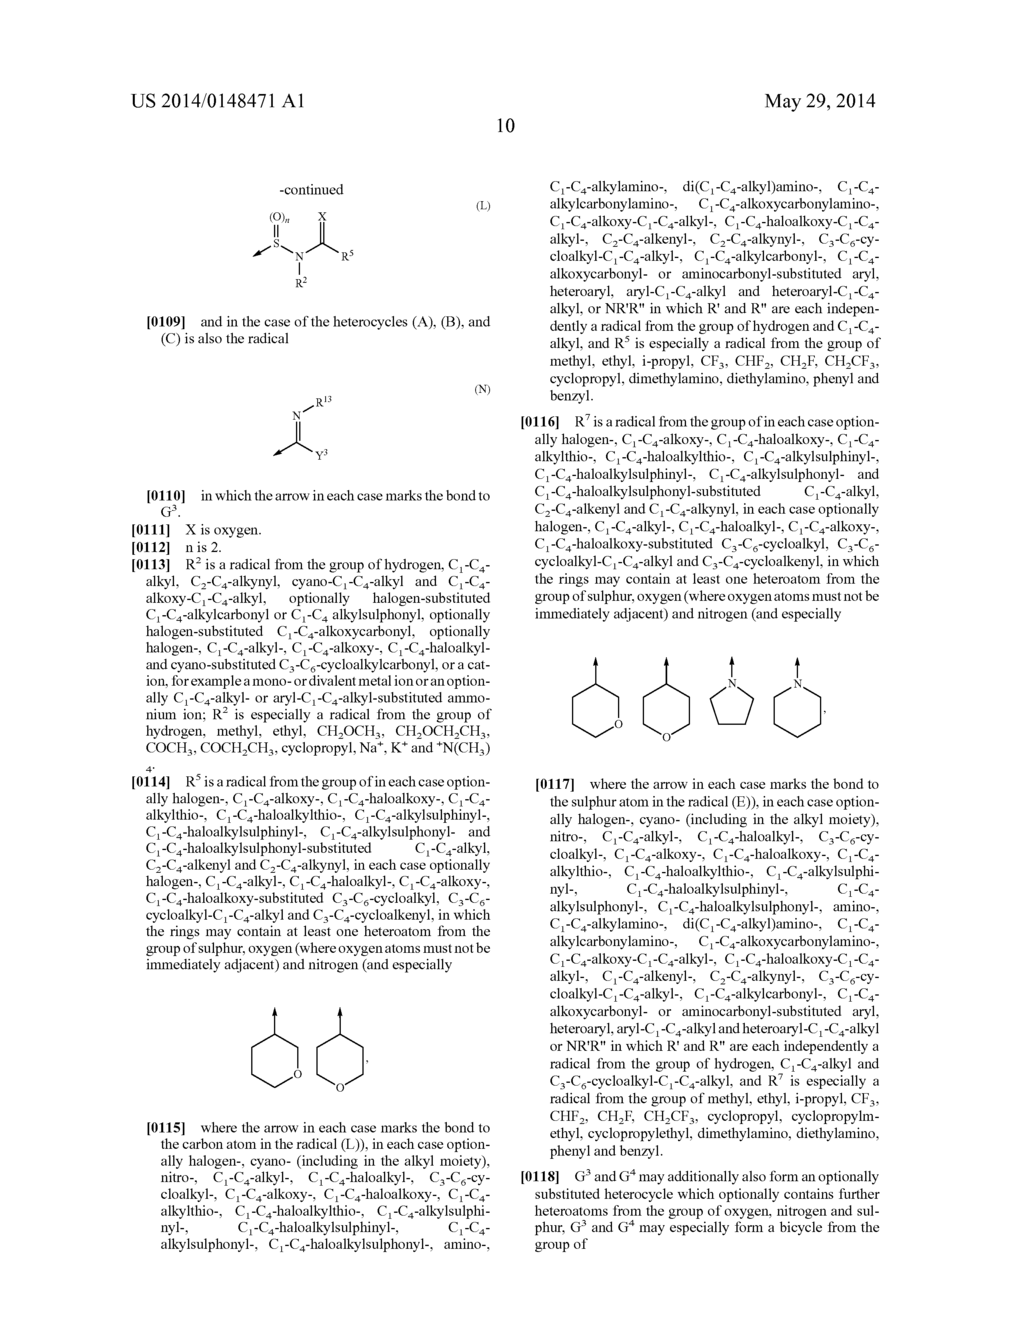 Heterocyclic Compounds as Pesticides - diagram, schematic, and image 11